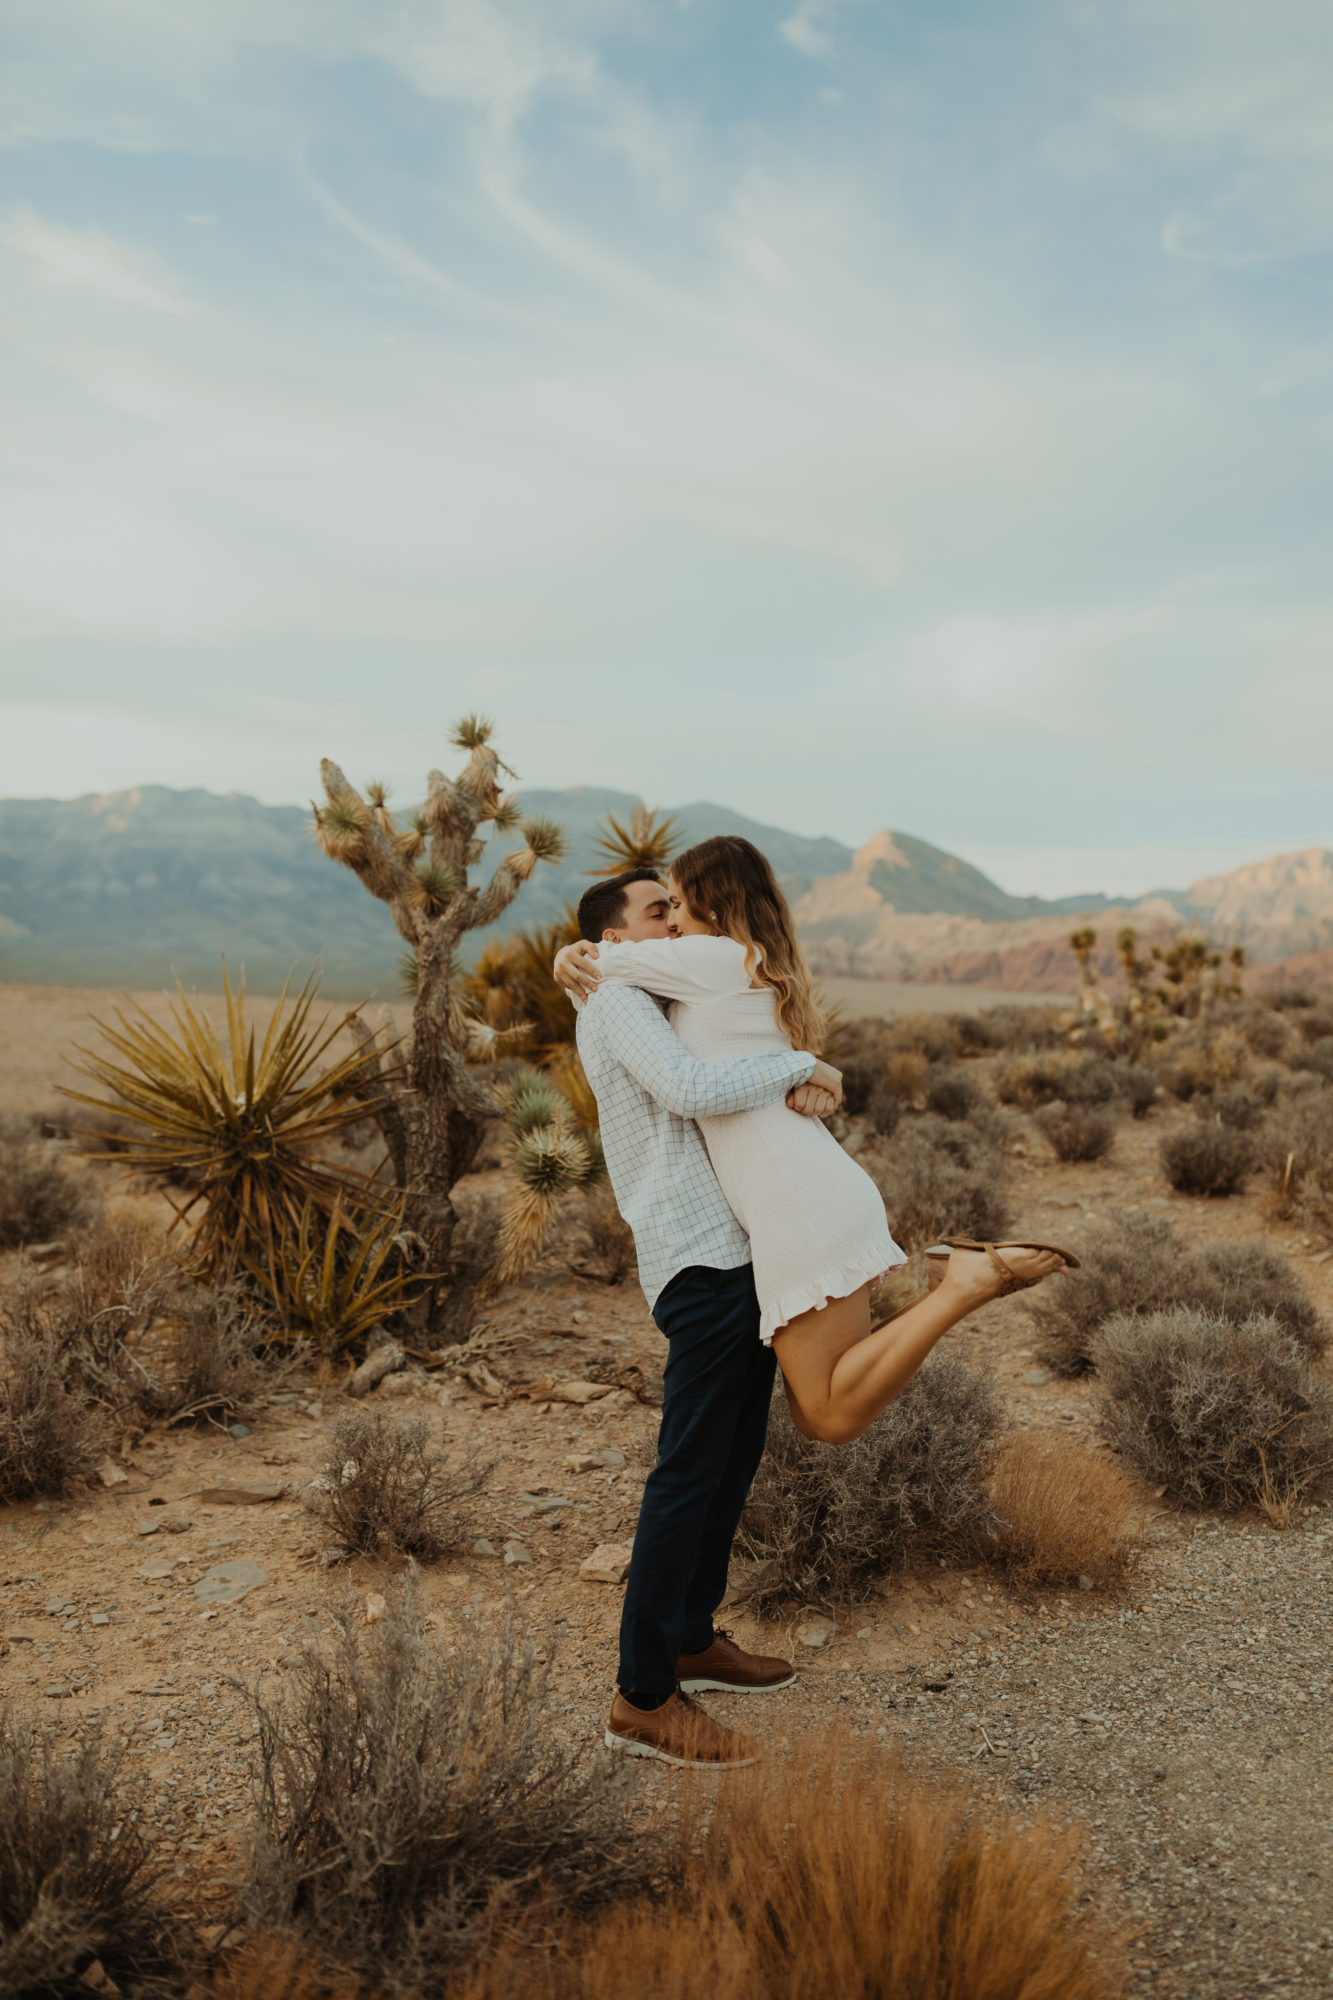 fiance picking up his girlfriend and kissing her after proposing to her in the desert